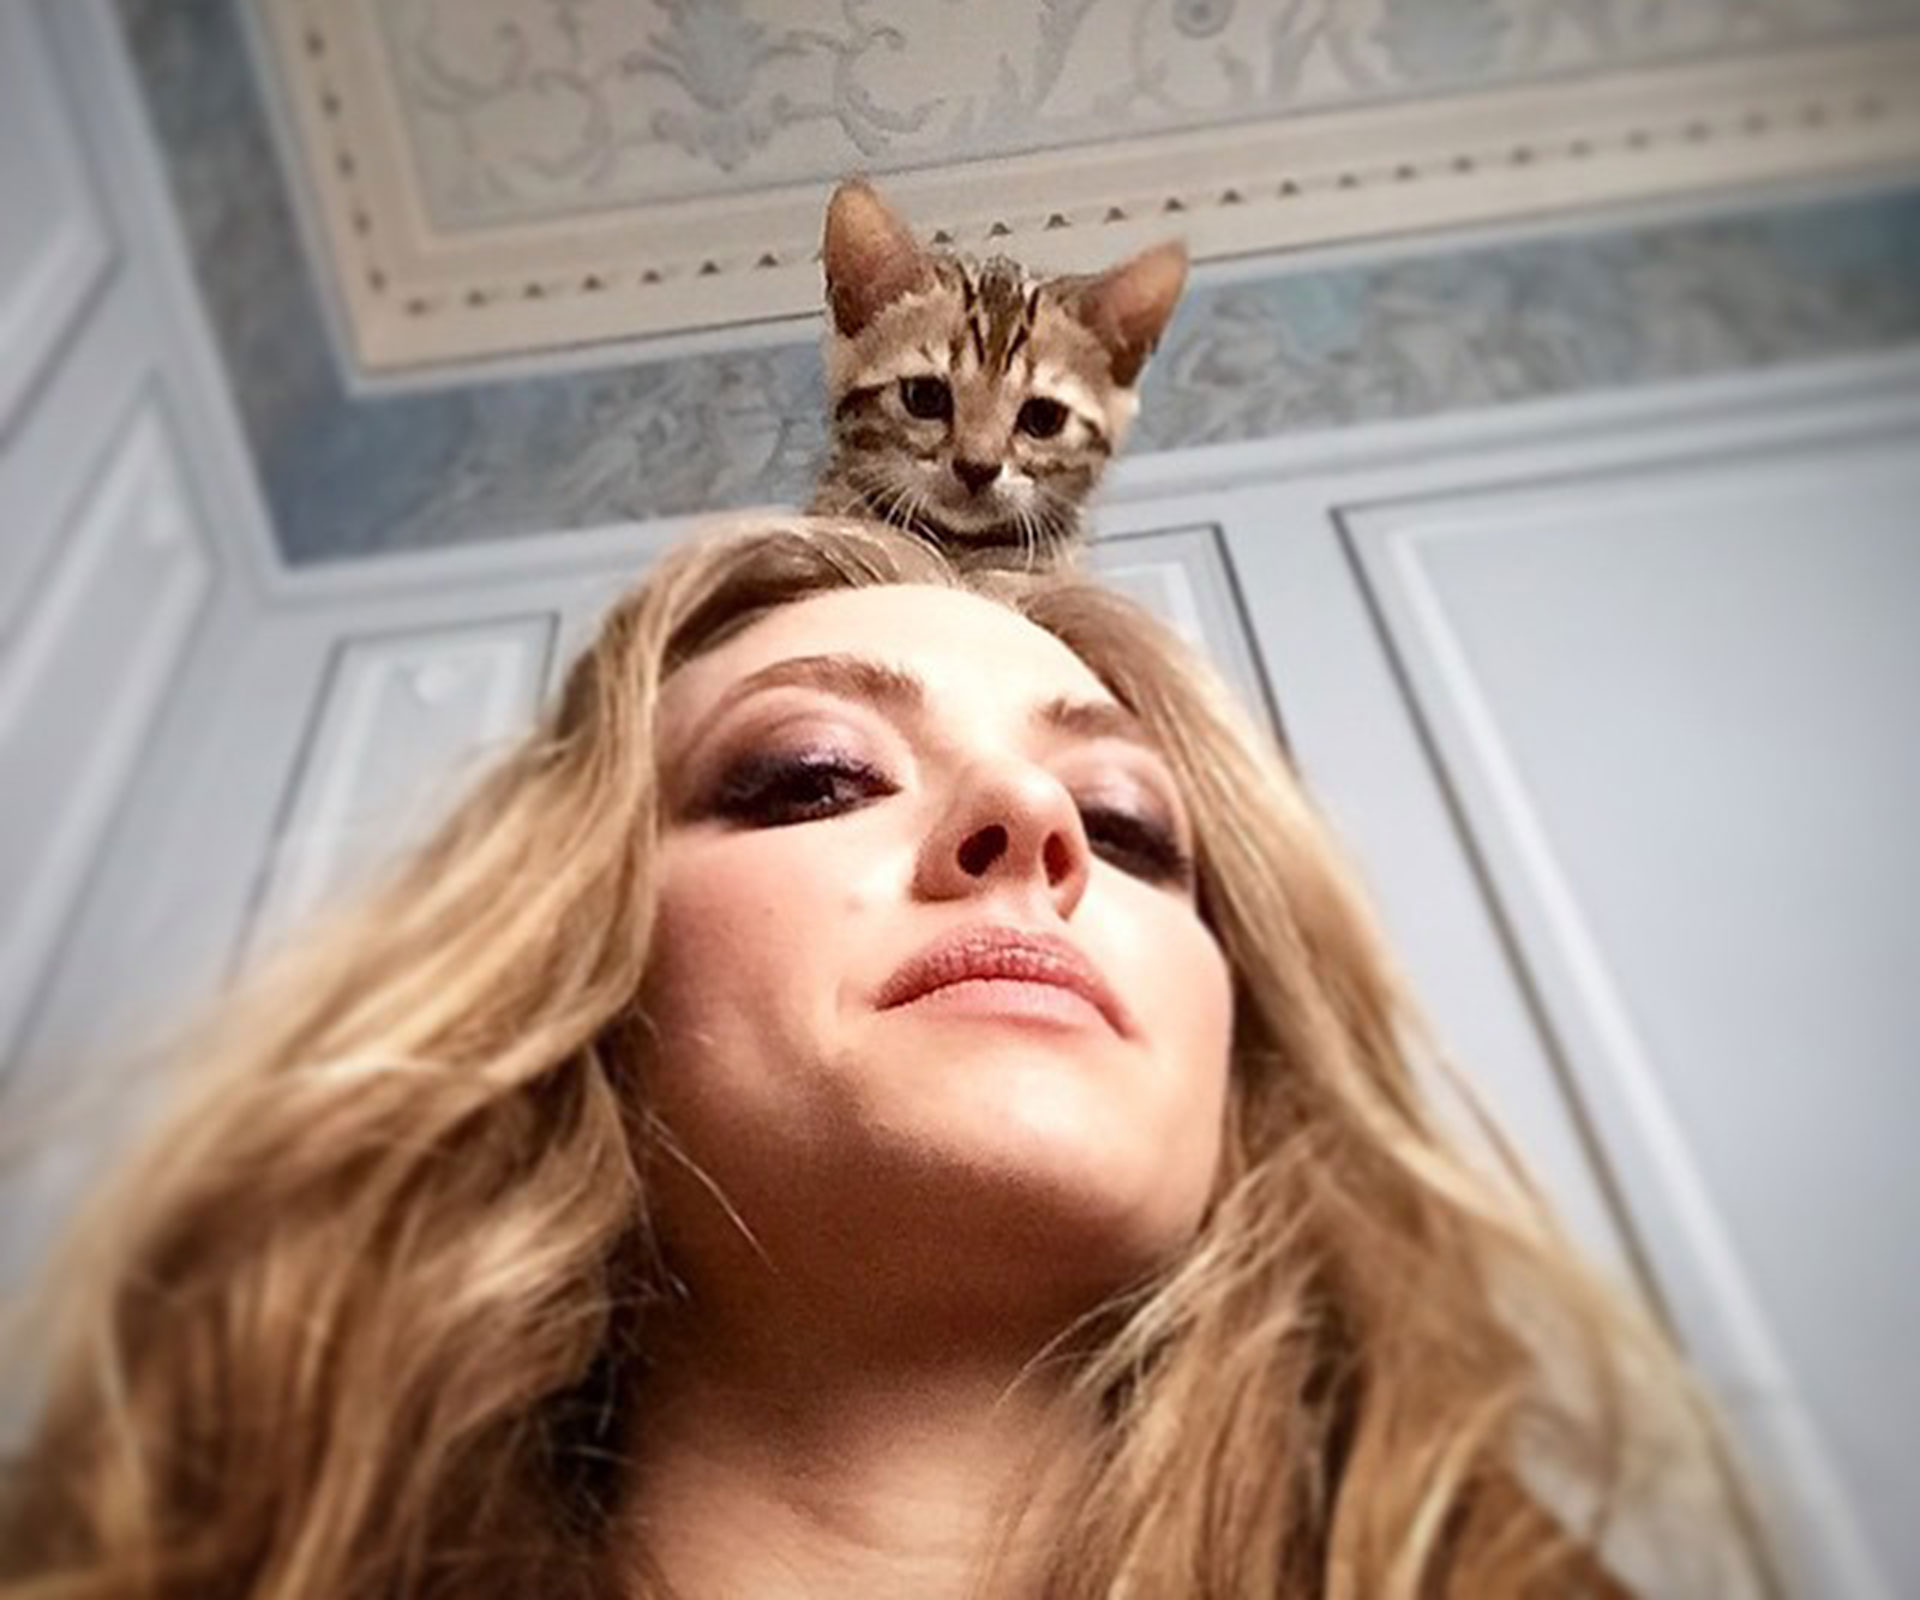 Celebrities share adorable pics with their pets.